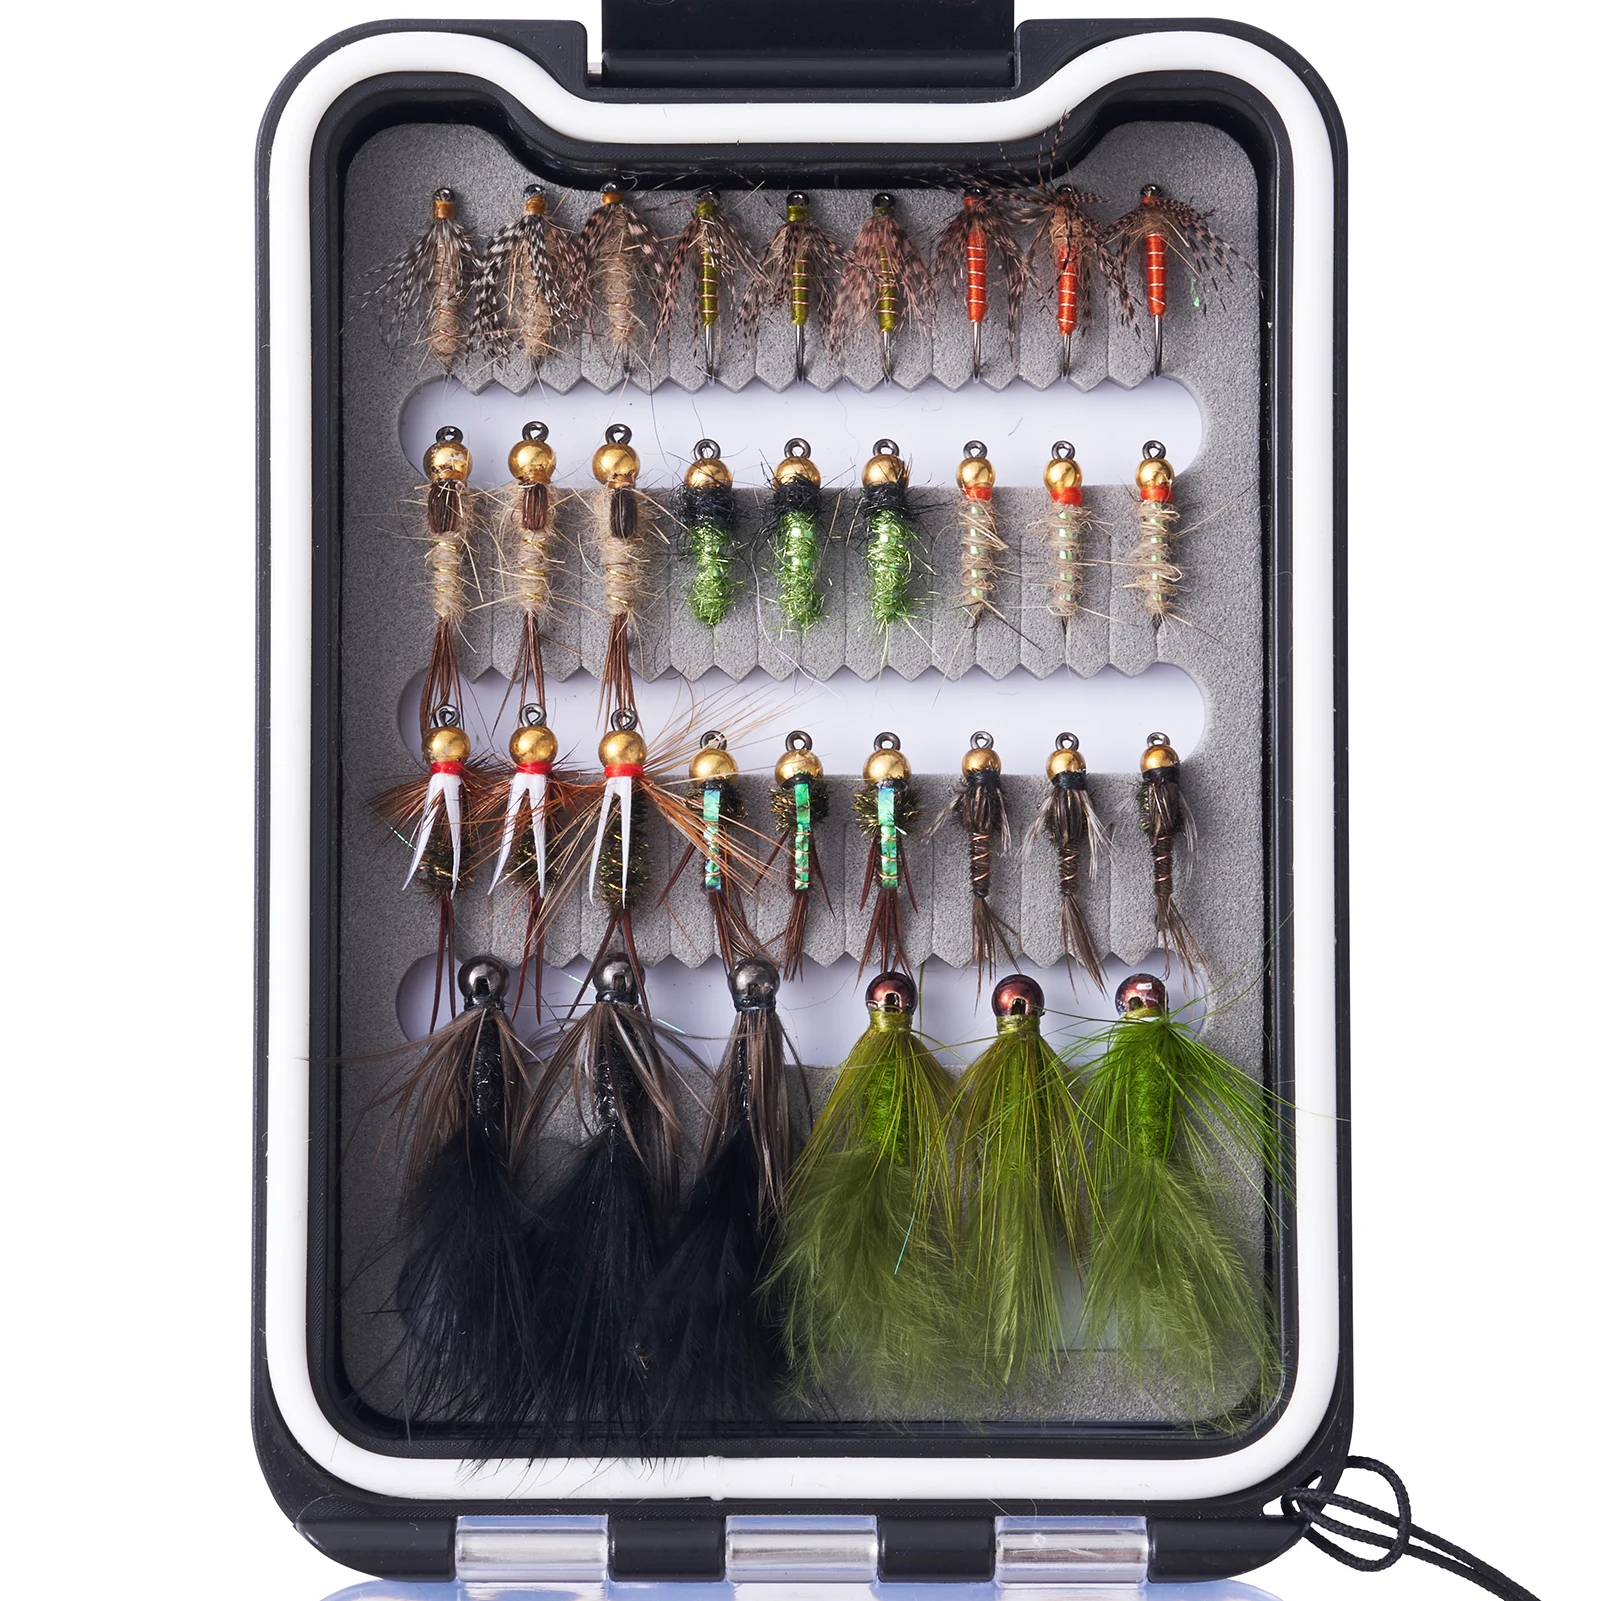 

Bassdash Trout Fly Fishing Flies Barbed Barbless Wet Flies Nymphs Streamers 33Pcs Assortment with Waterproof Fly Box